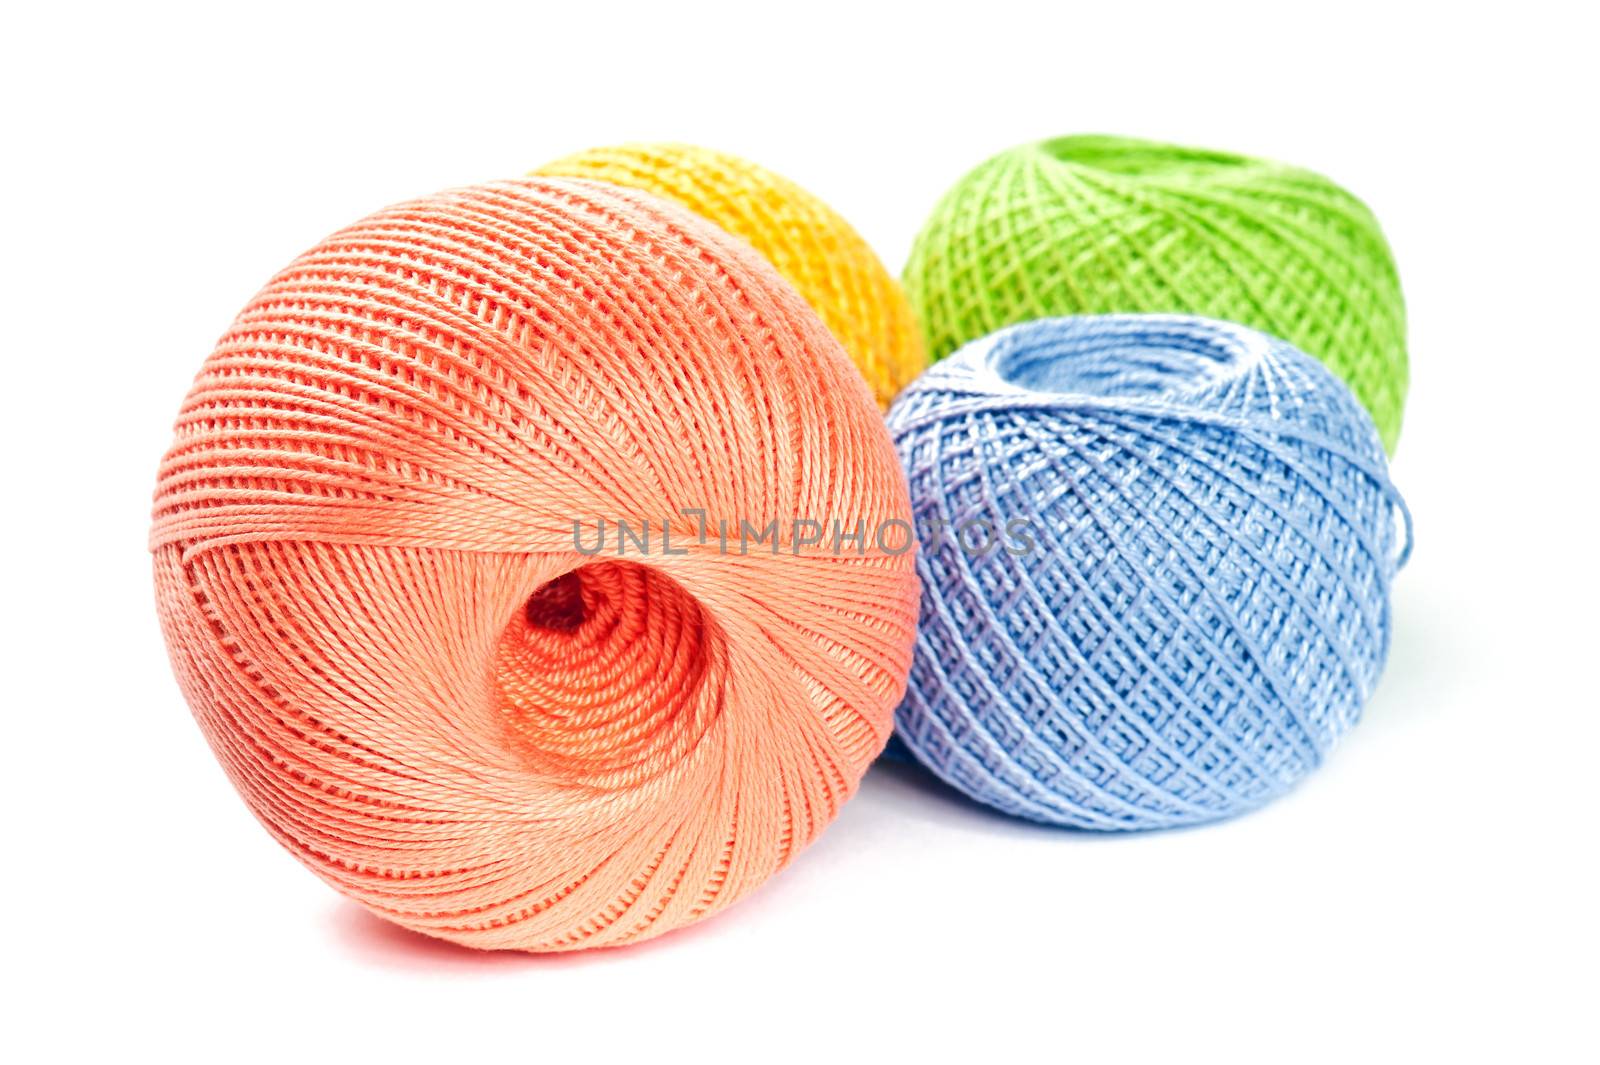 Colorful Knitting Balls on White Baclground